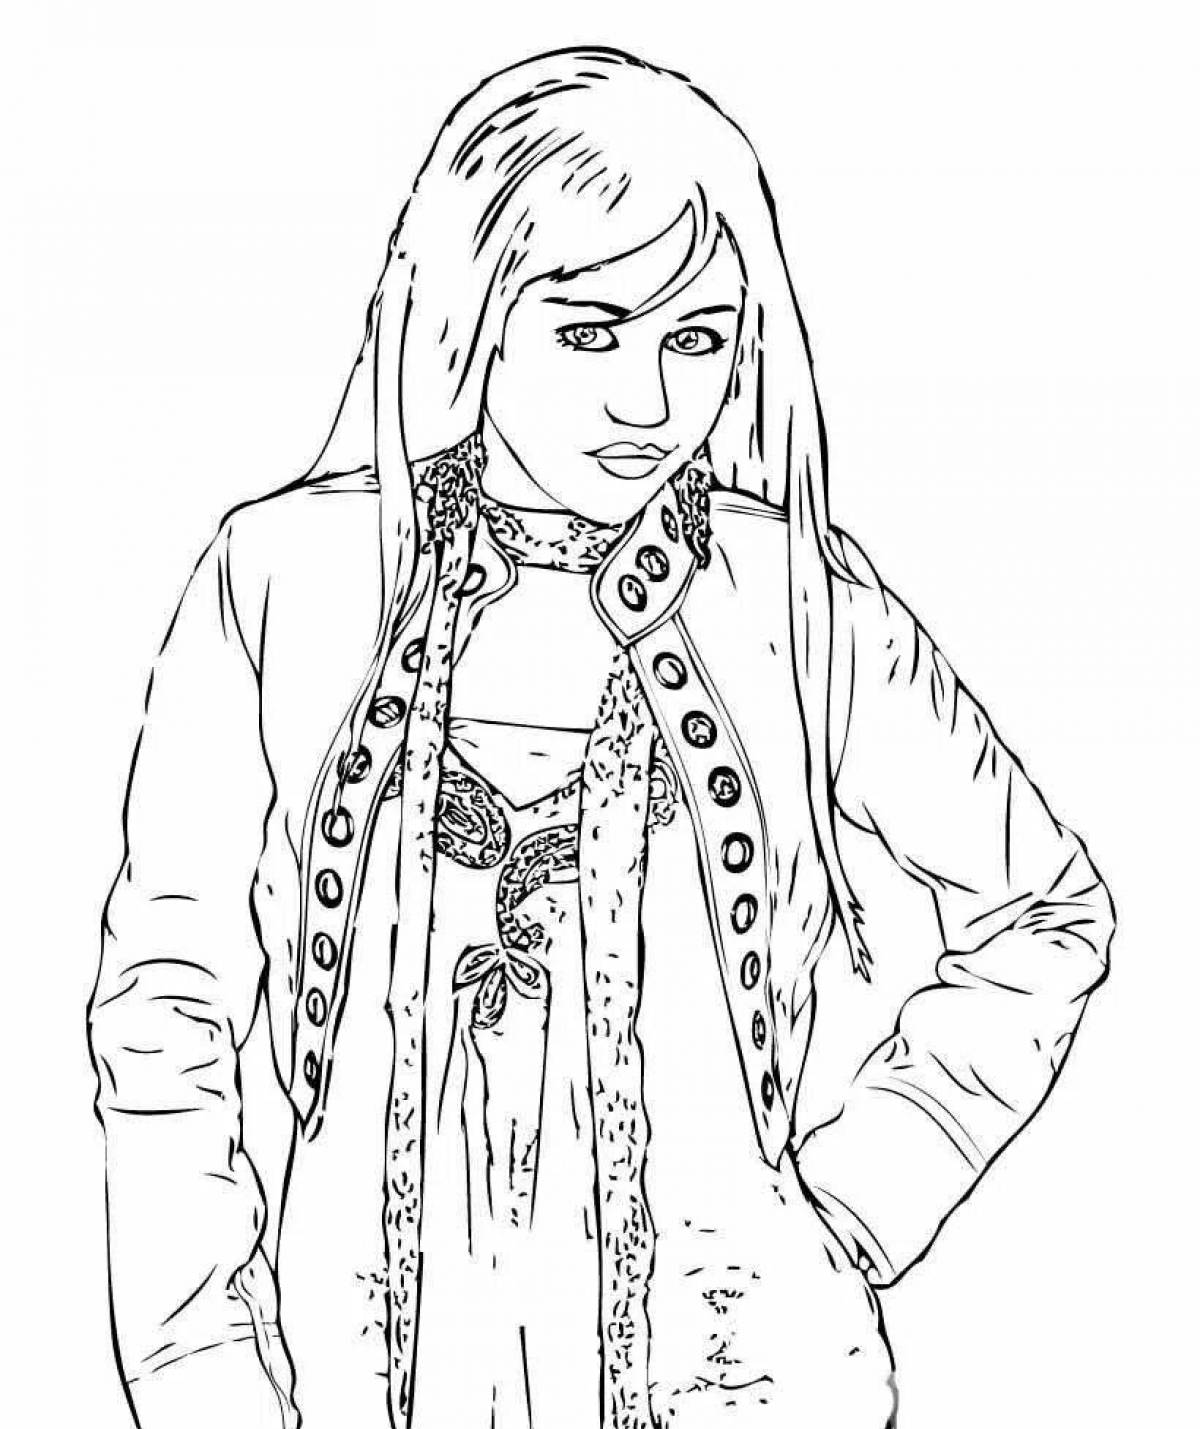 Hanna glowing coloring book